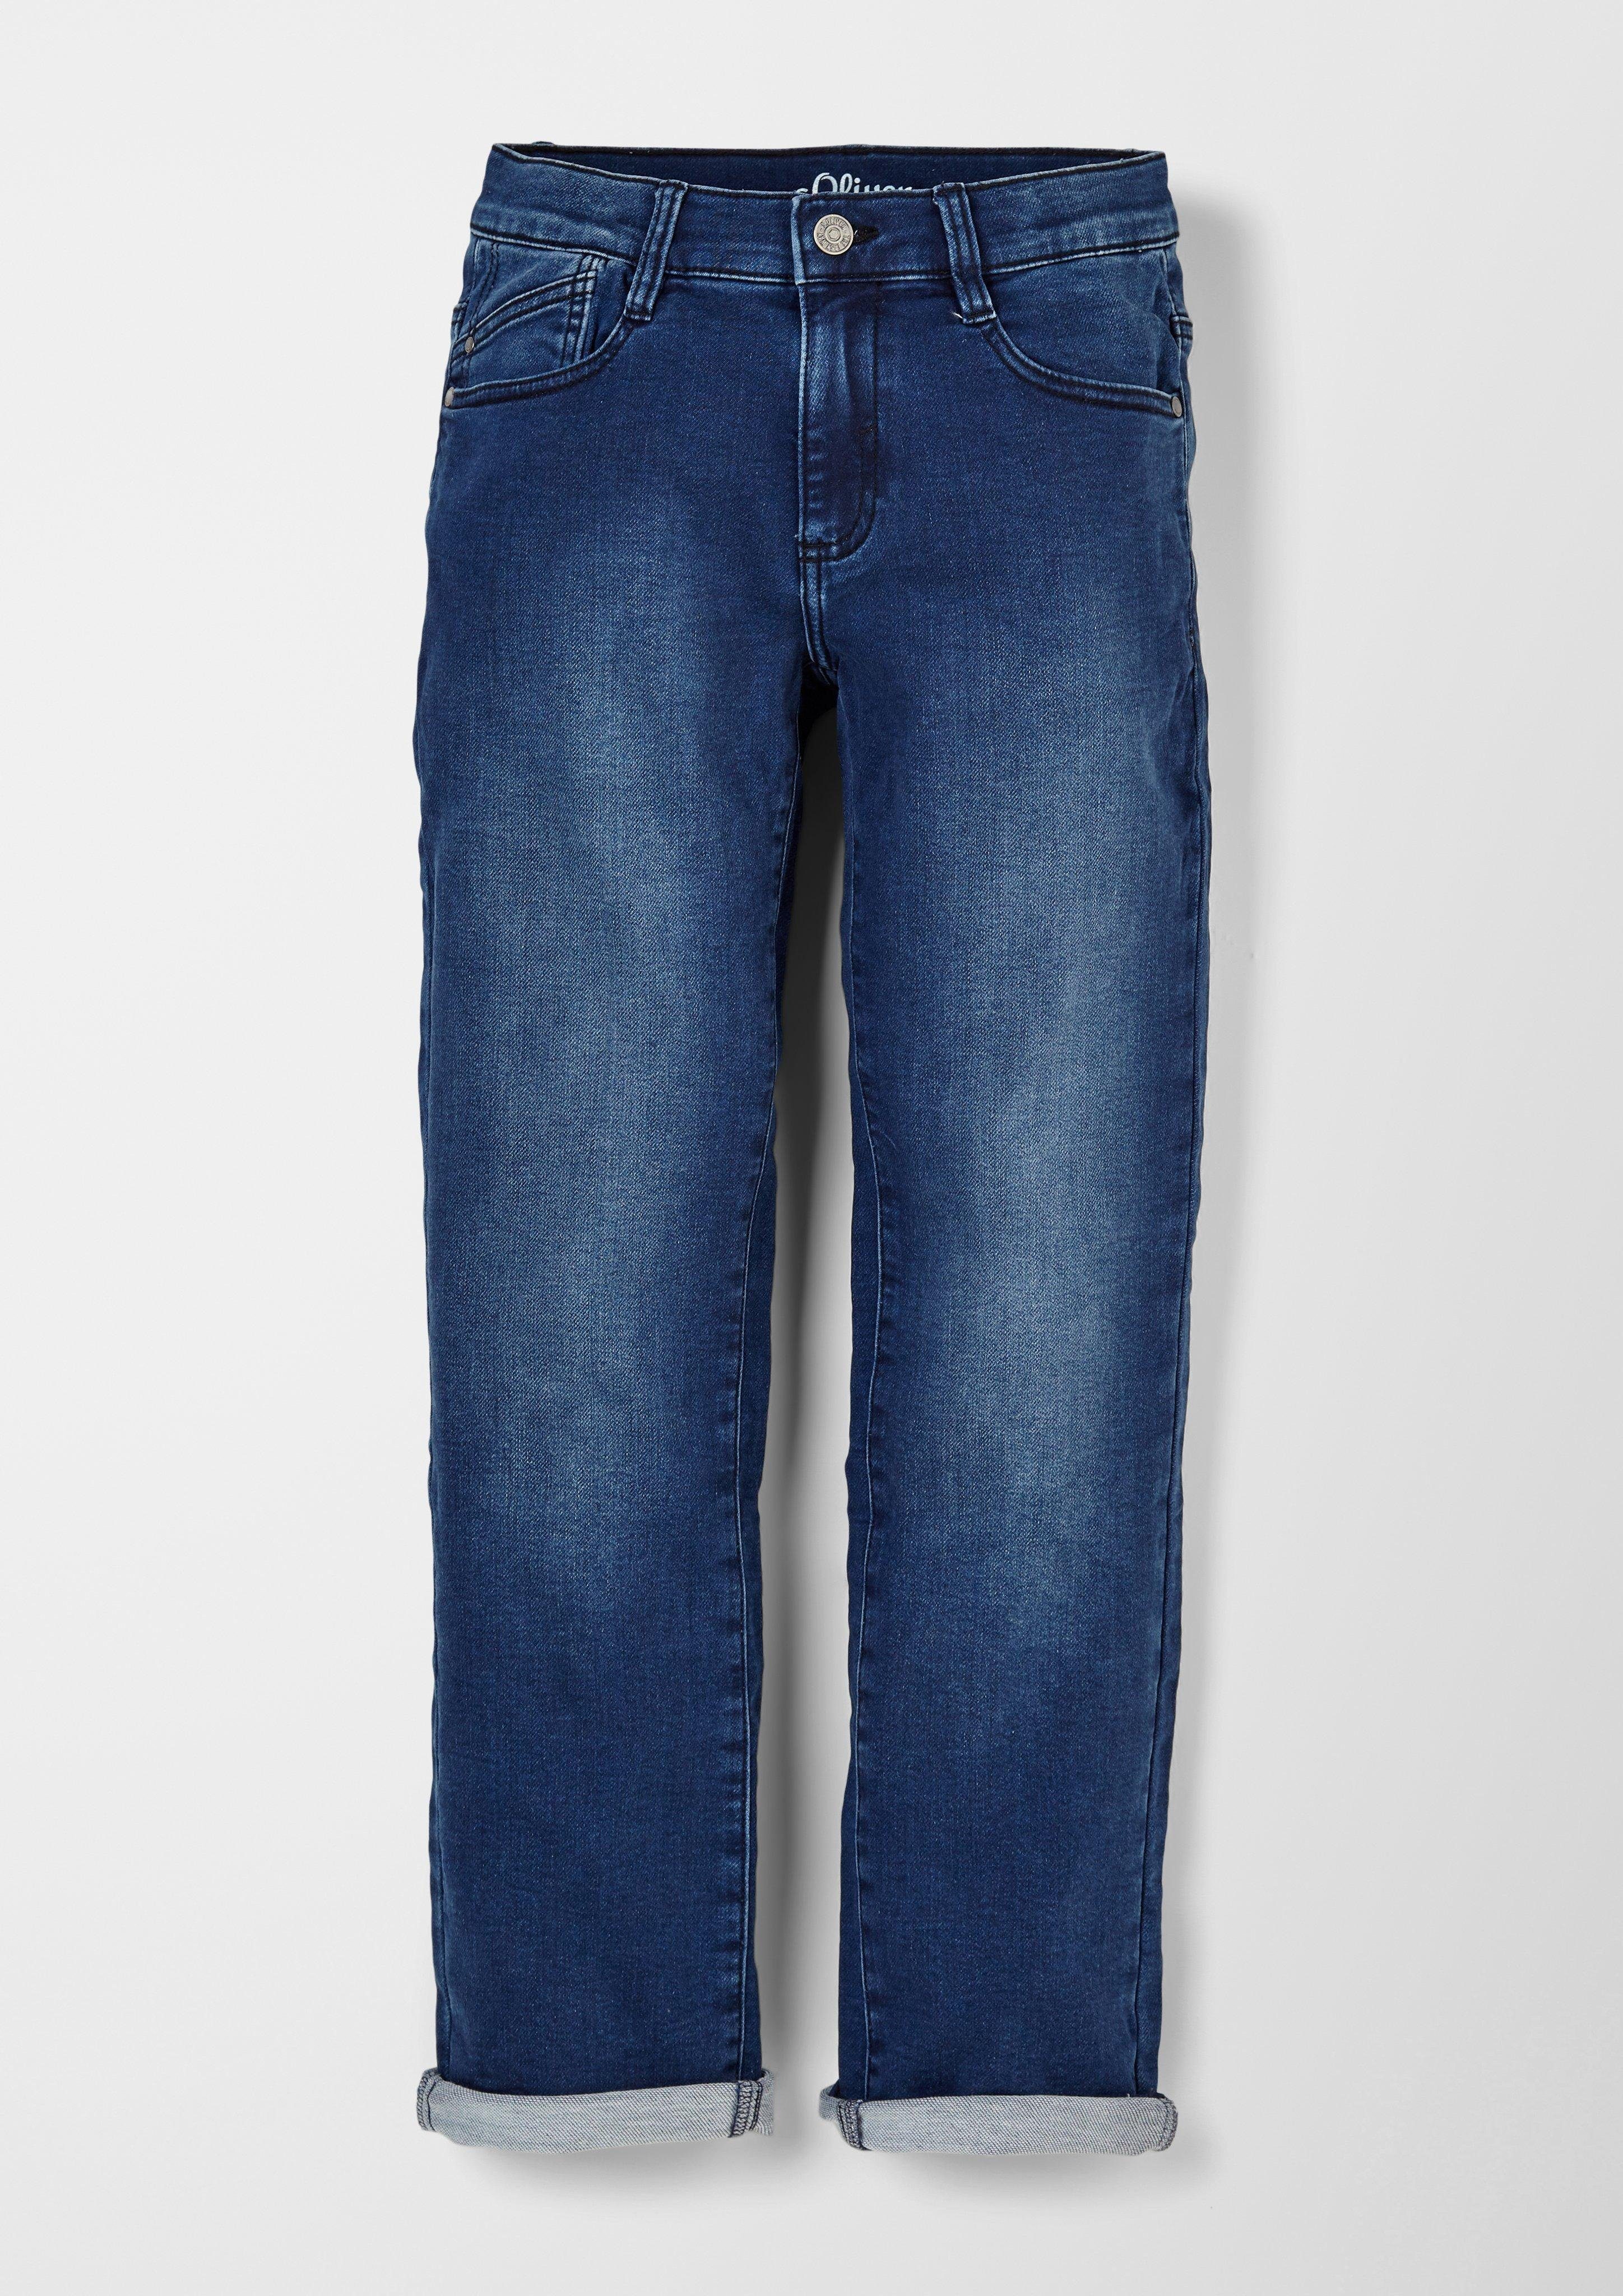 Leg Fit 5-Pocket-Jeans / Waschung / Mid Pete s.Oliver Jeans Regular / Straight Rise